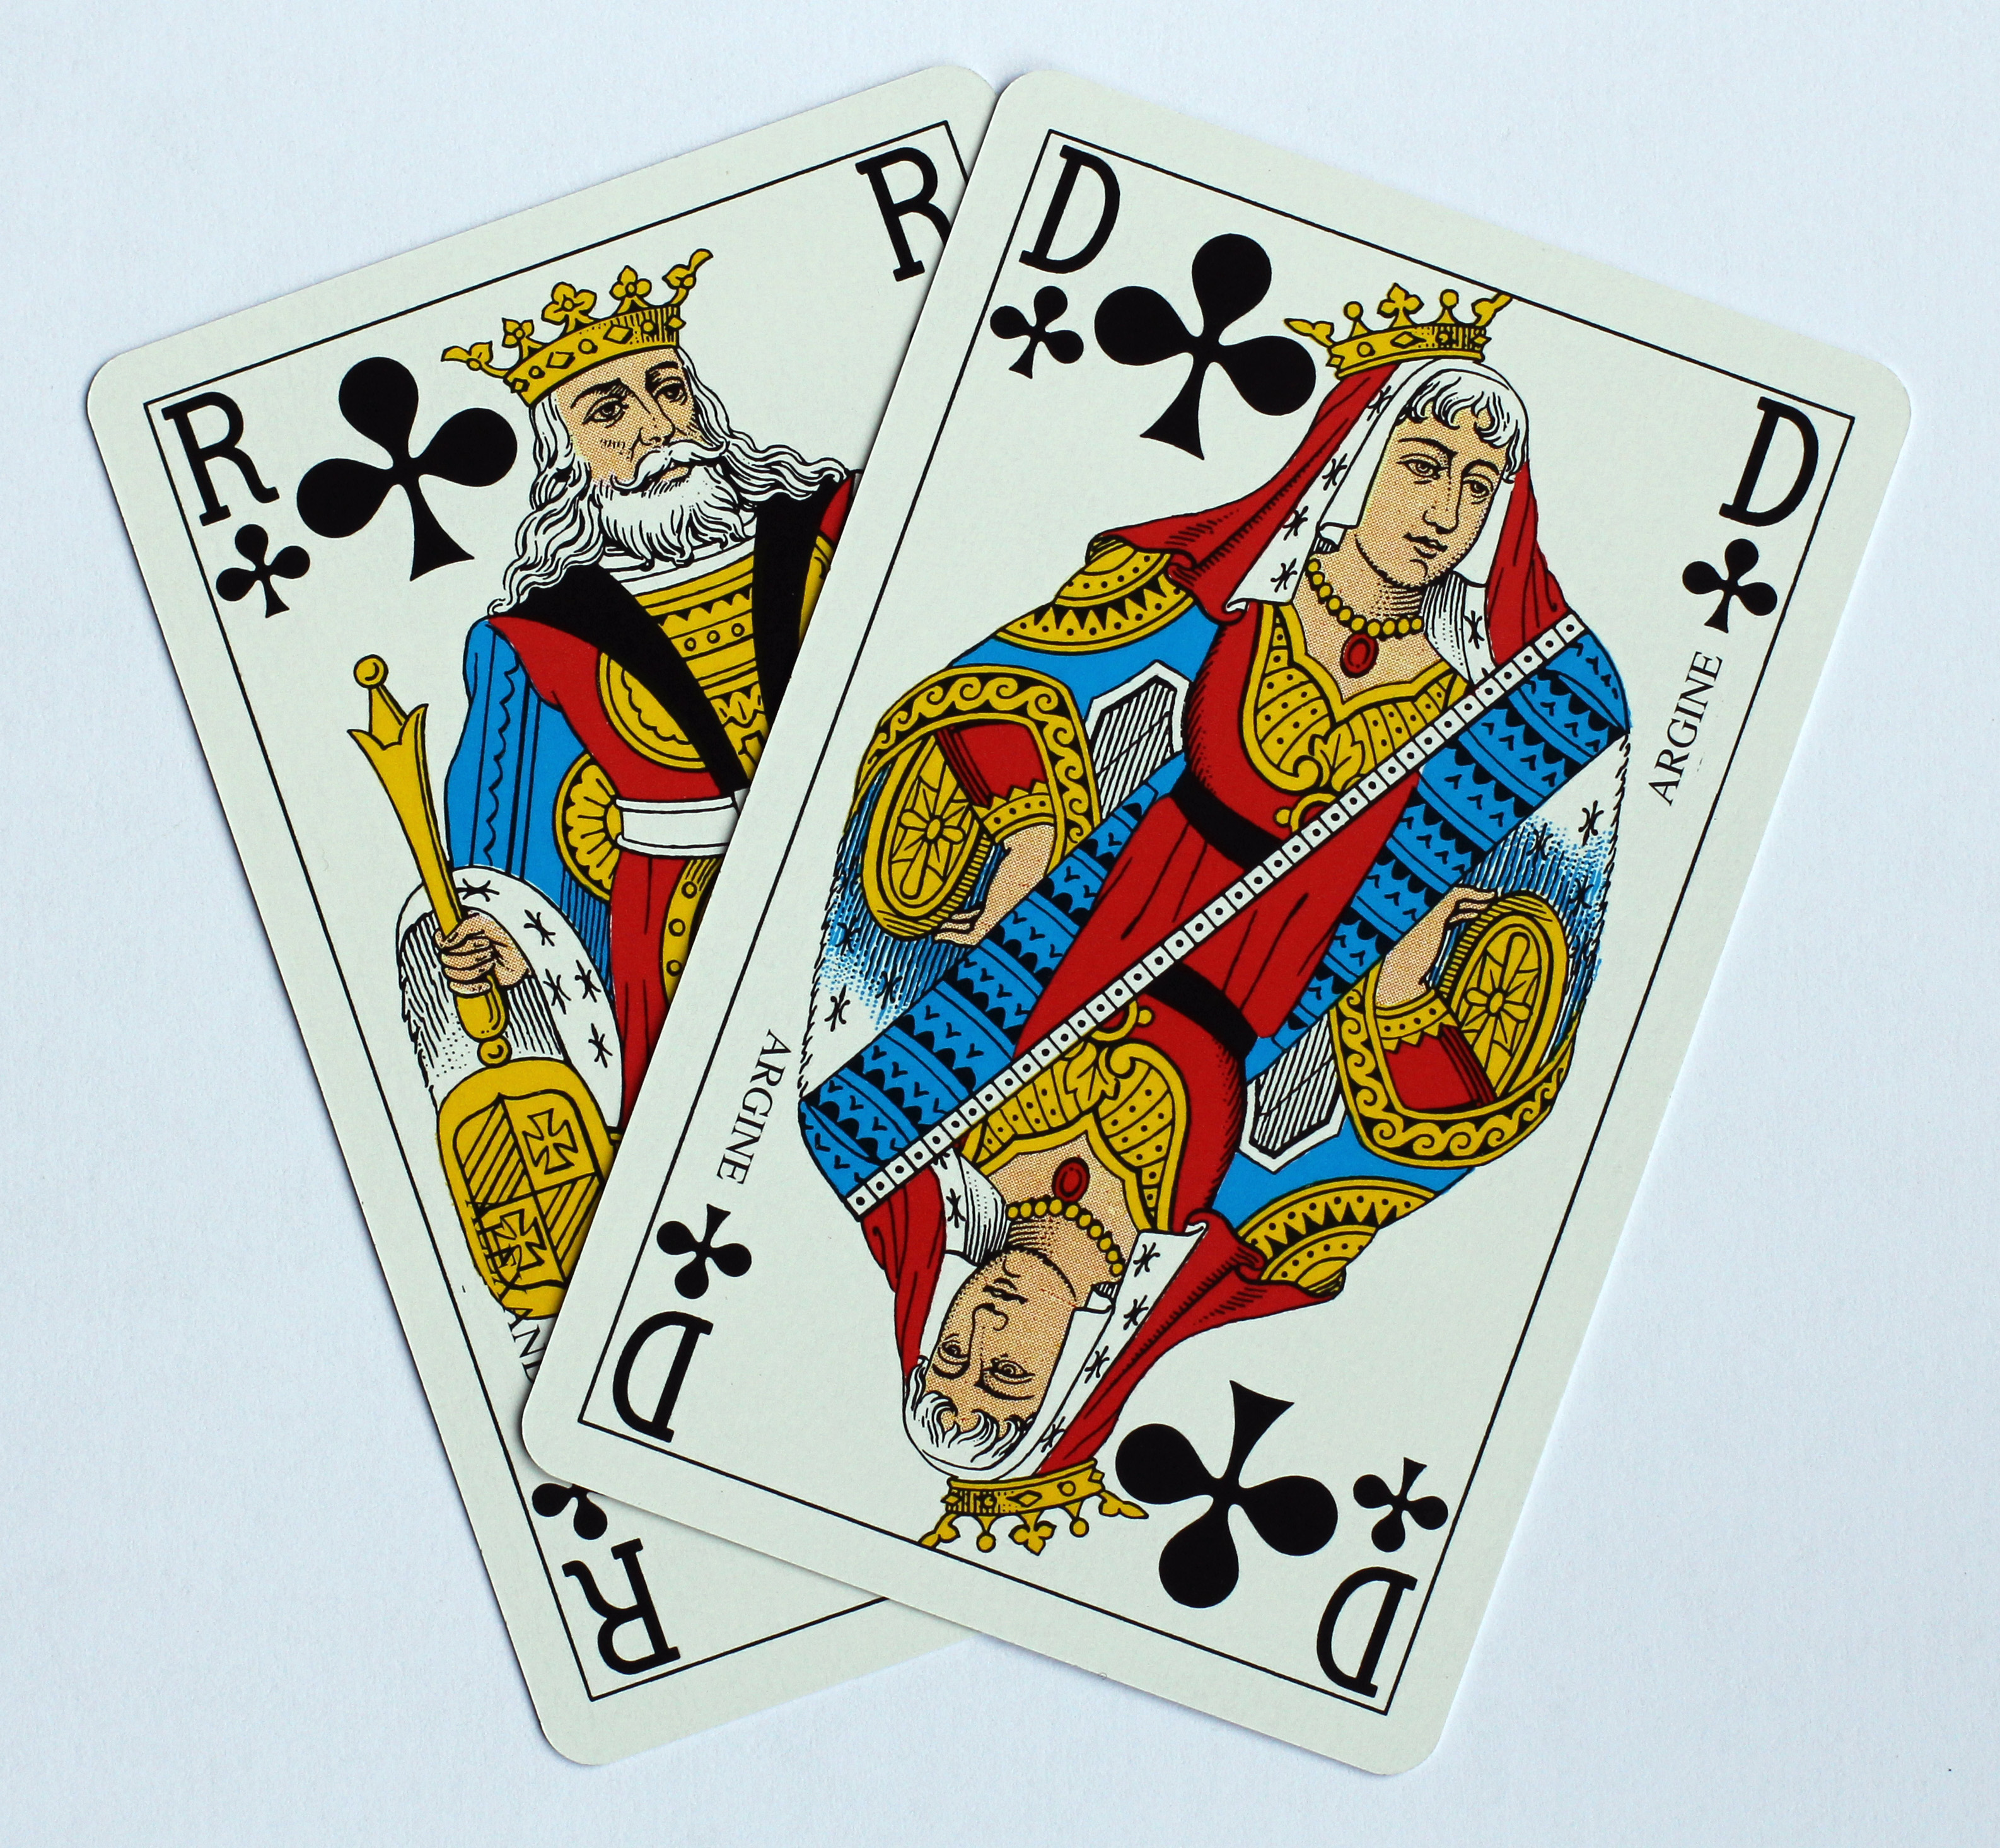 Why Aren't The King And The Queen Equal In A Deck Of Cards?